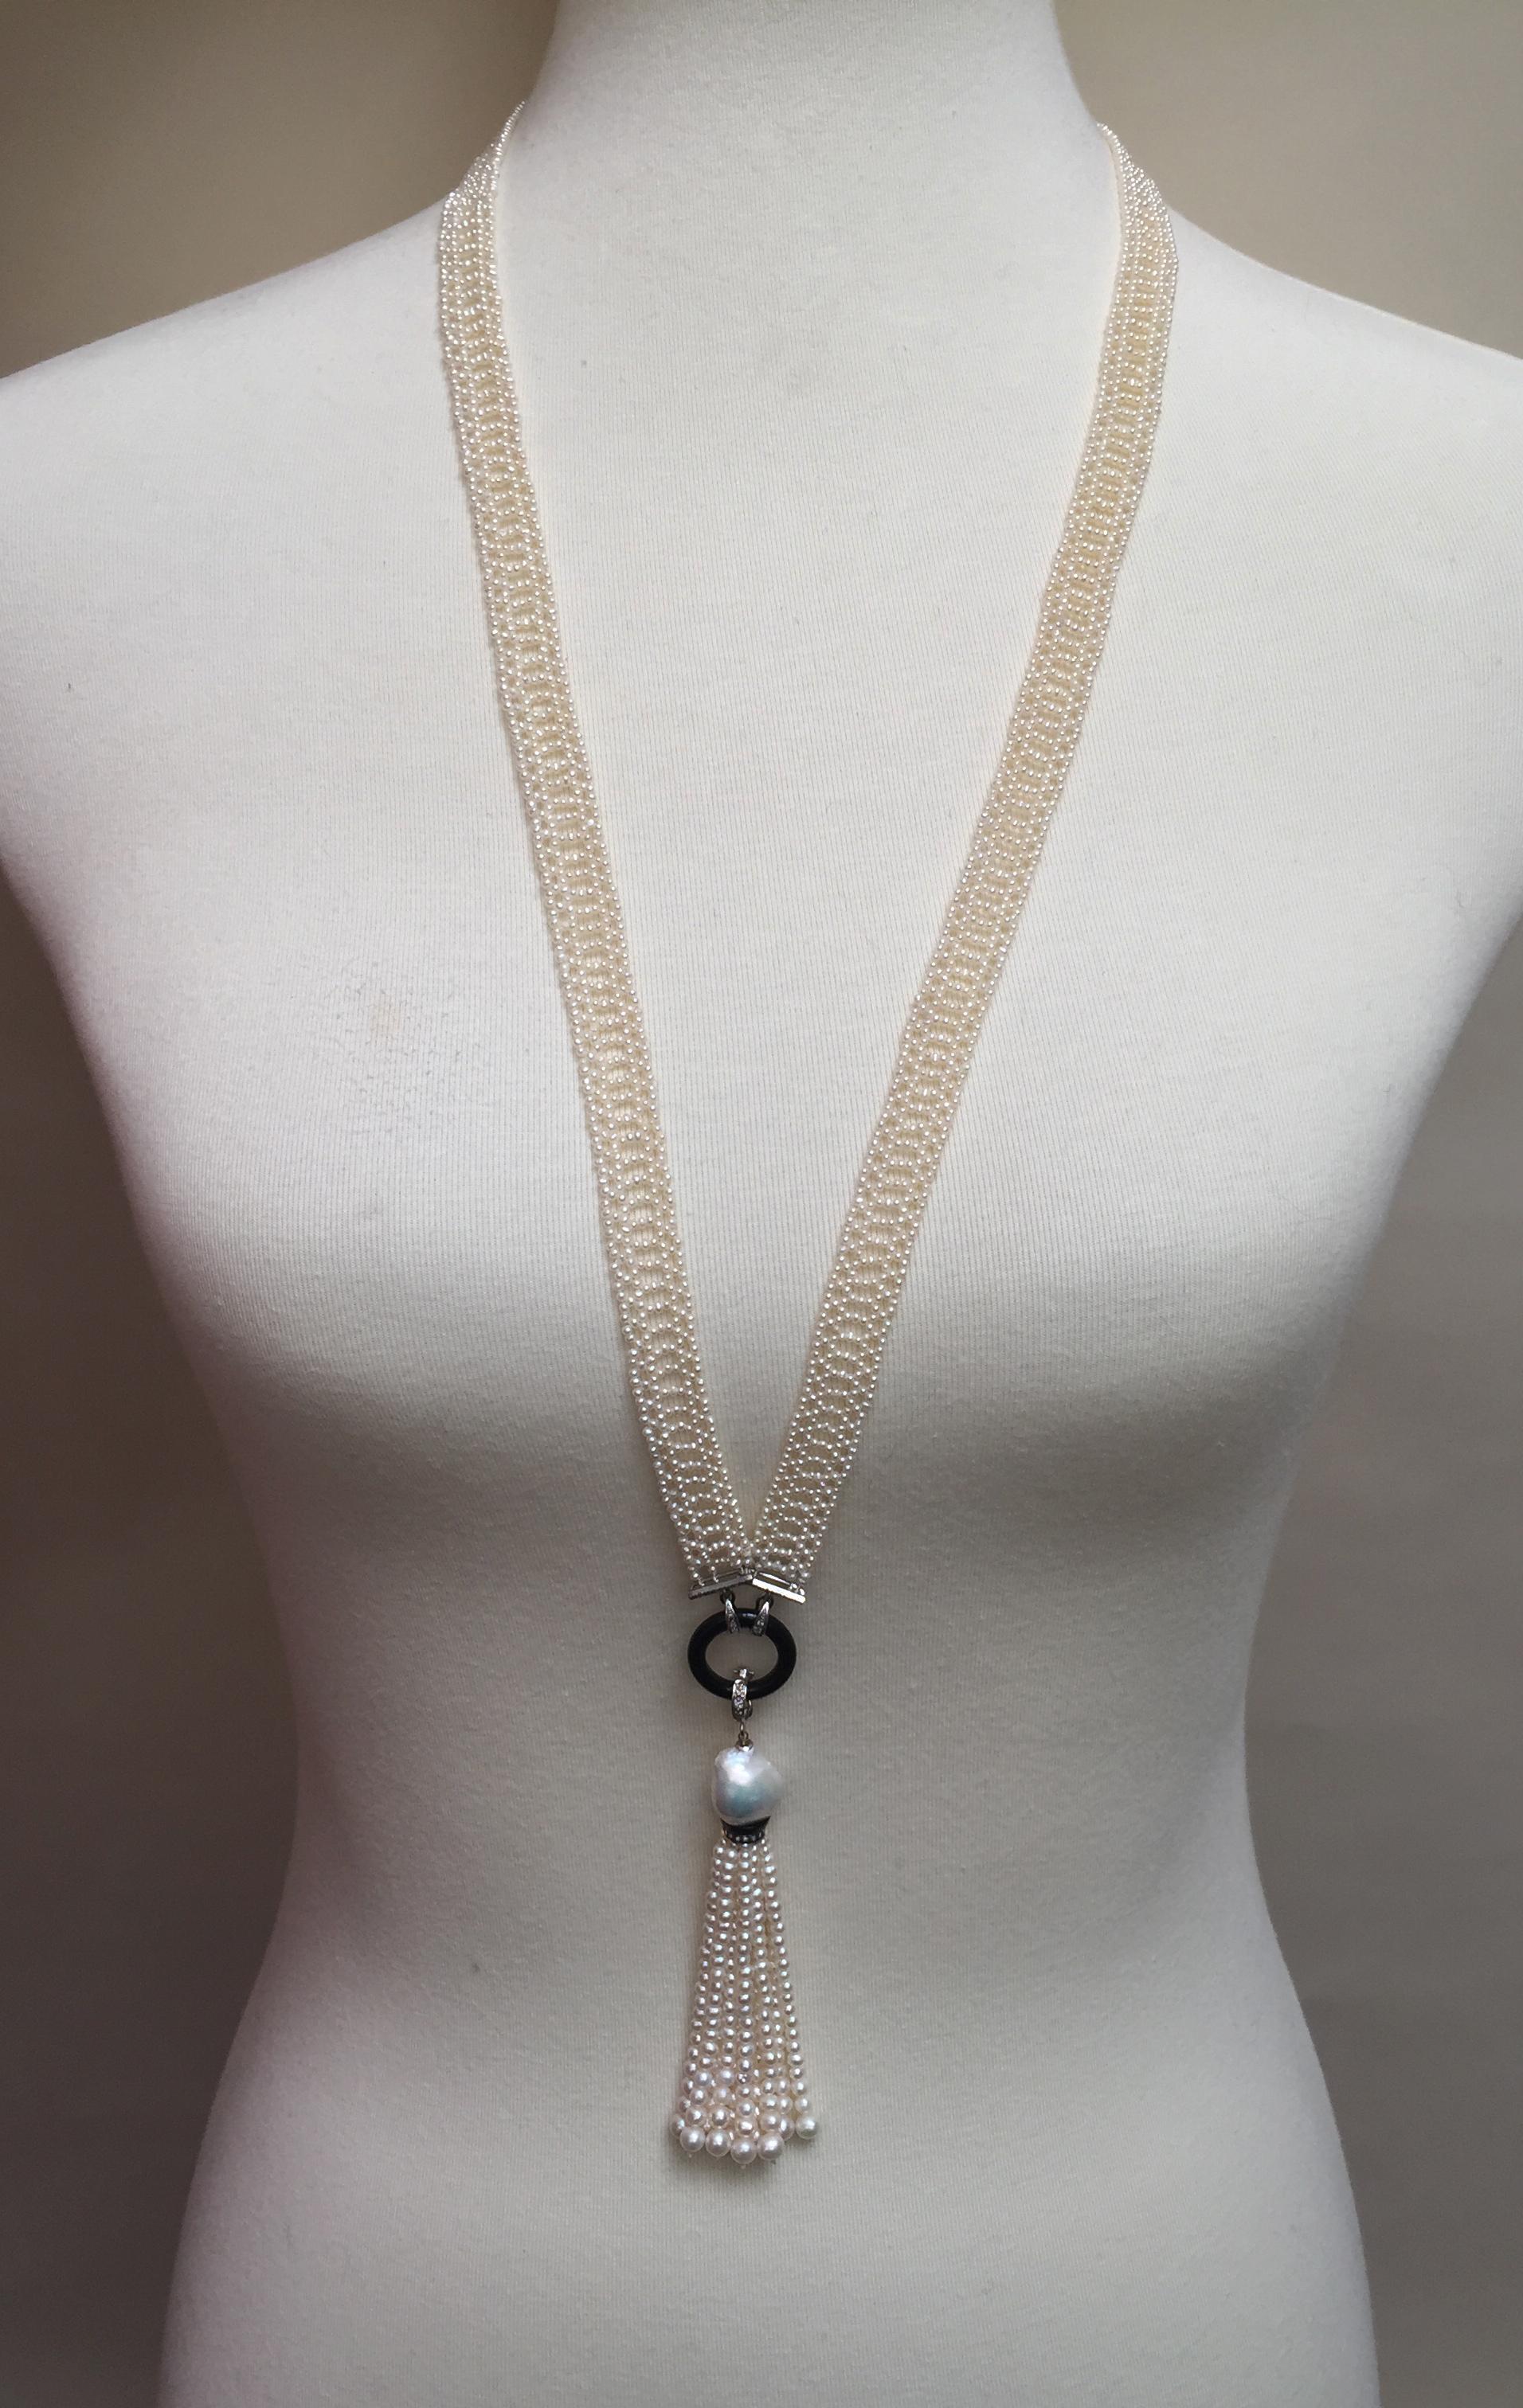 The delicate weave of the seed pearl sautor is contrasted with an onyx ring, diamonds, and a removable graduated tassel. This necklace is an exclusive design by Marina J., inspired by her home countries traditional Russian pearl weaving. Marina has